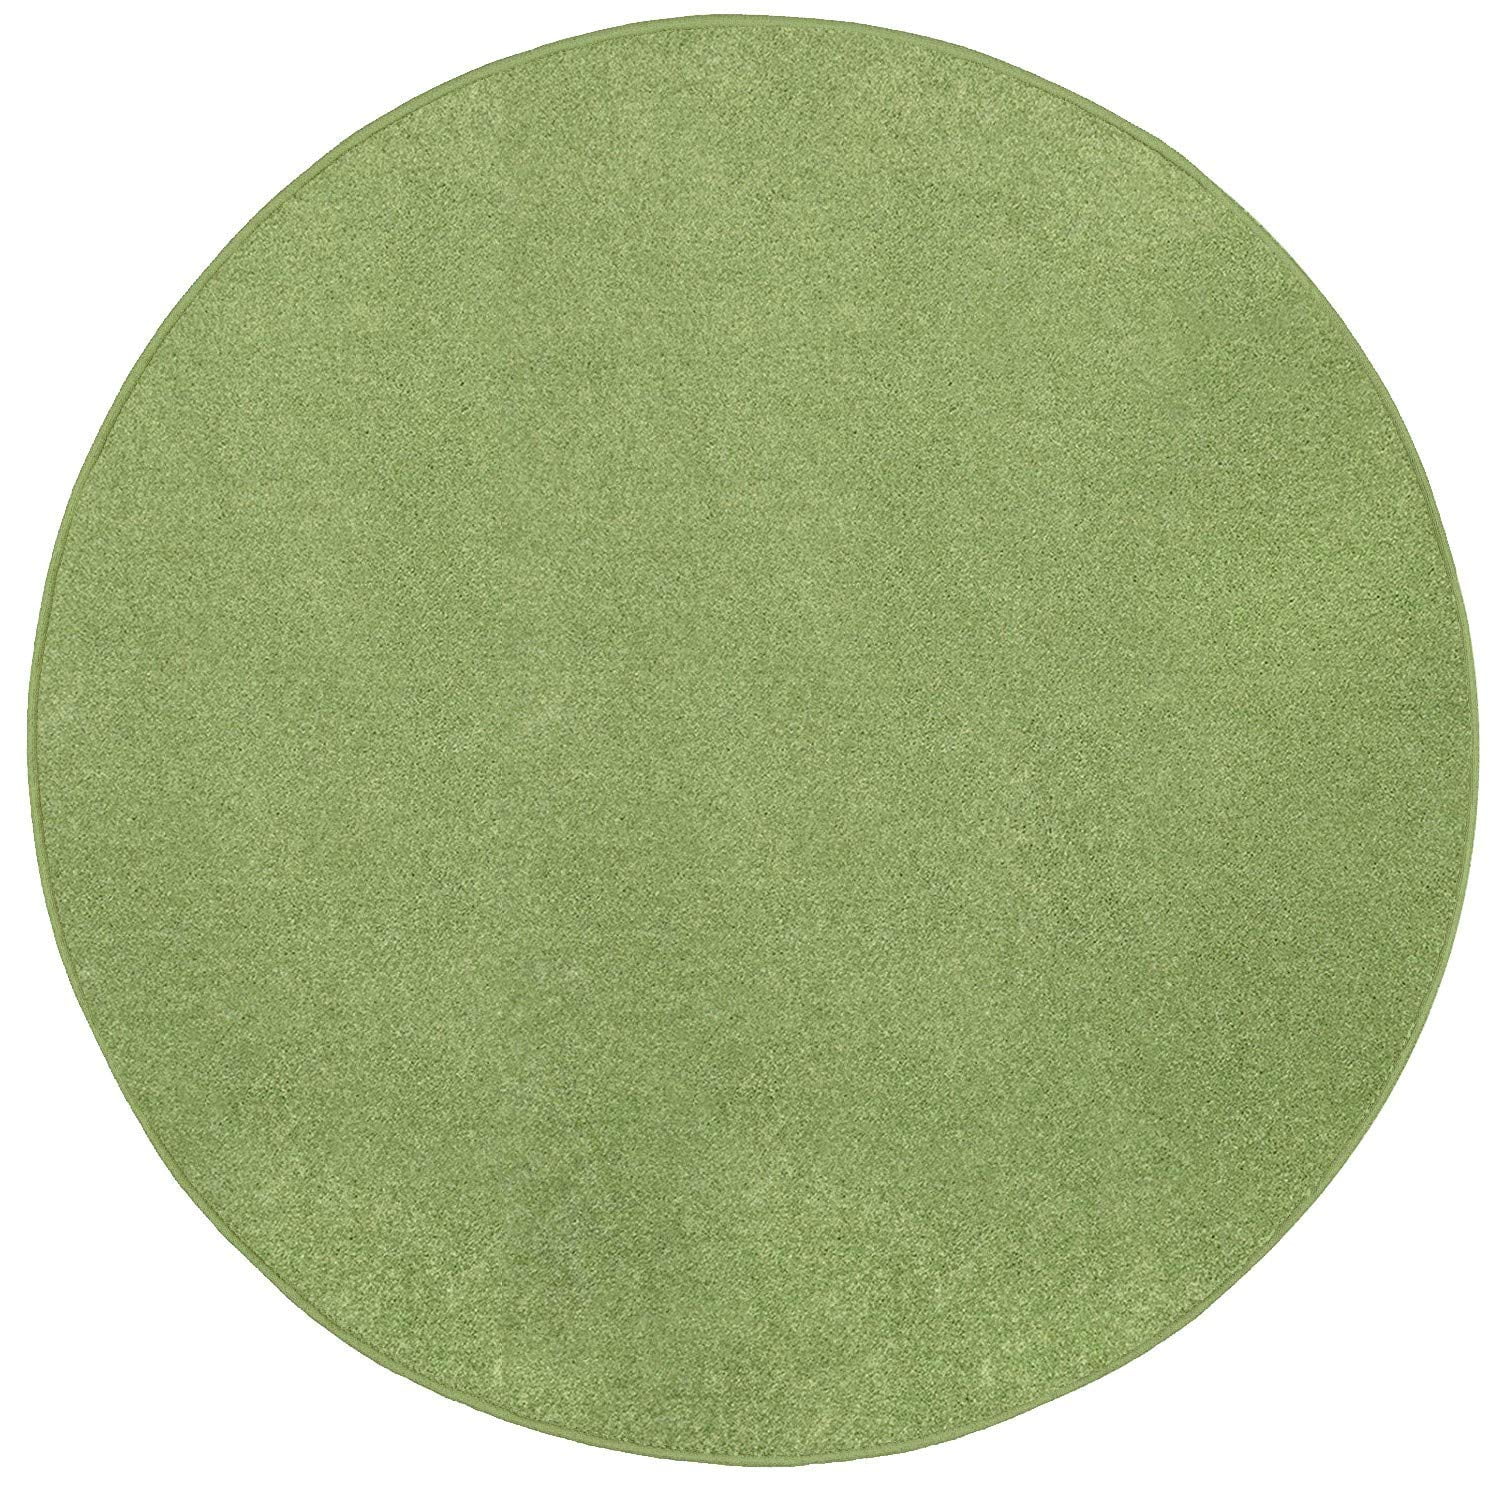 Starwars Collection Kids Favourite Area Rugs Lime Green - 6' Round - W...